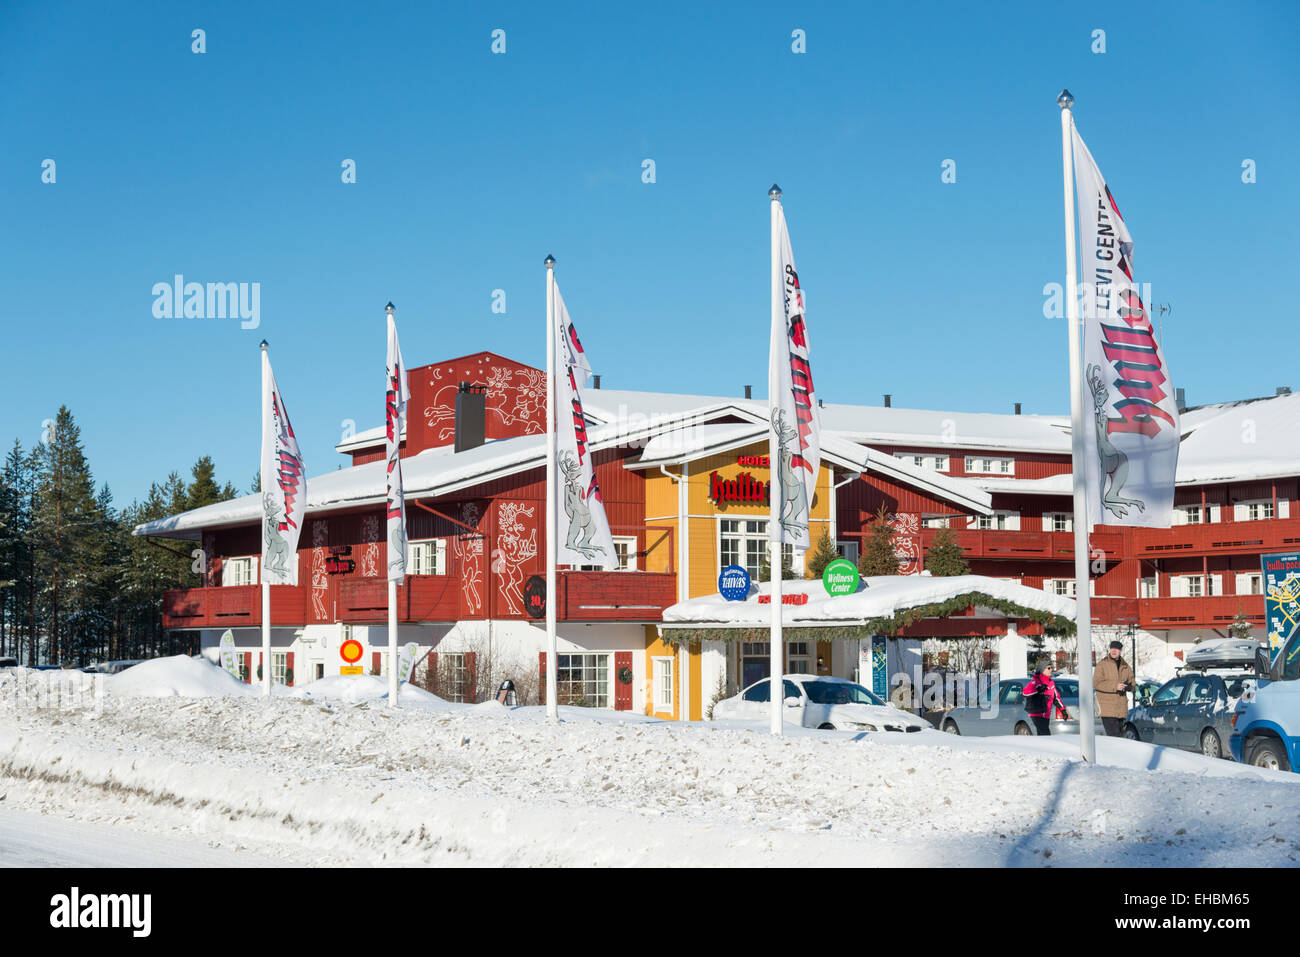 The Crazy Reindeer Hotel Levi Lapland Finland in winter Stock Photo